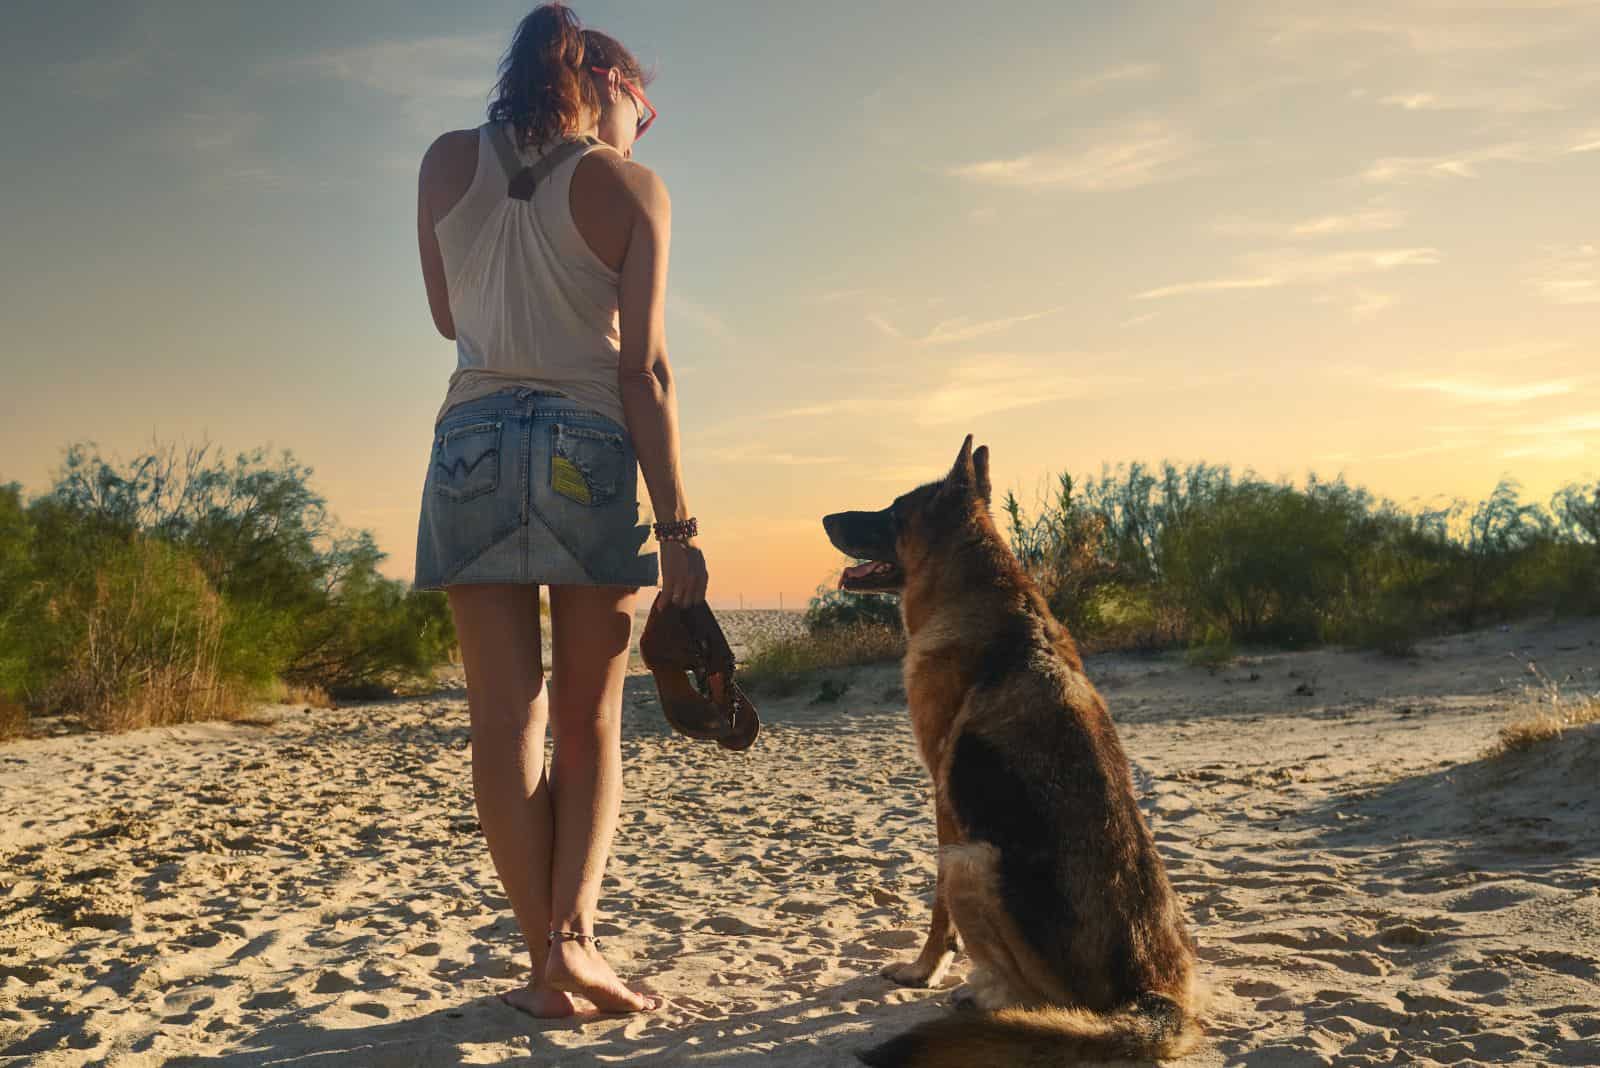 german shepherd sitting on the sand and looking at the woman